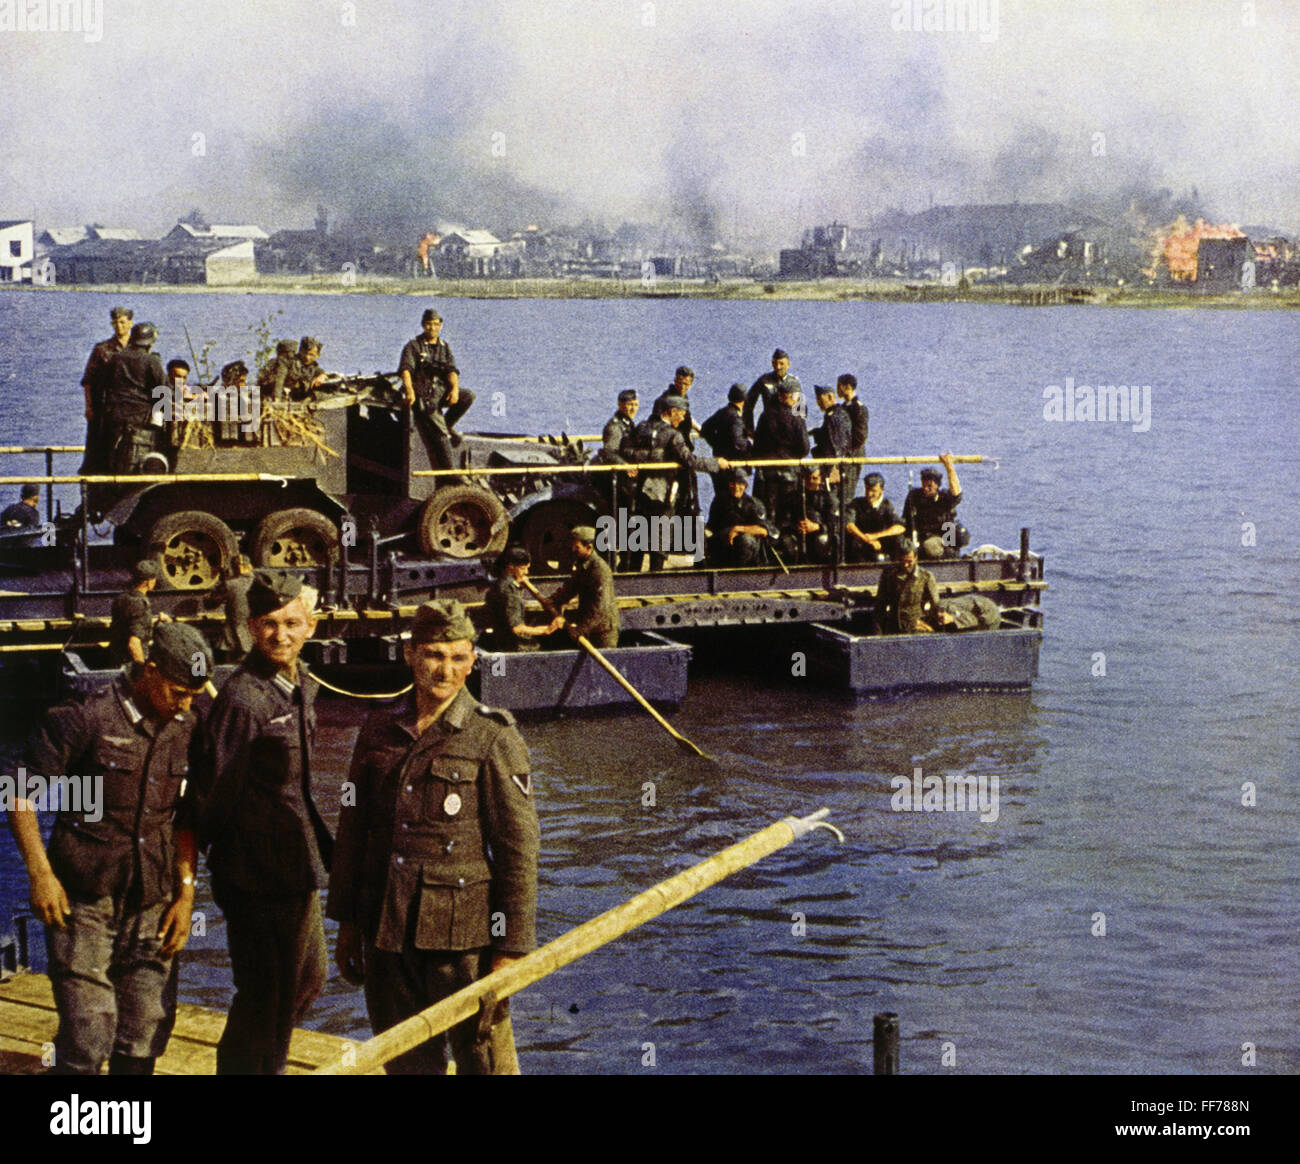 events, Second World War / WWII, Russia 1941, German soldiers crossing a river on a pontoon ferry, probably summer 1941, Additional-Rights-Clearences-Not Available Stock Photo